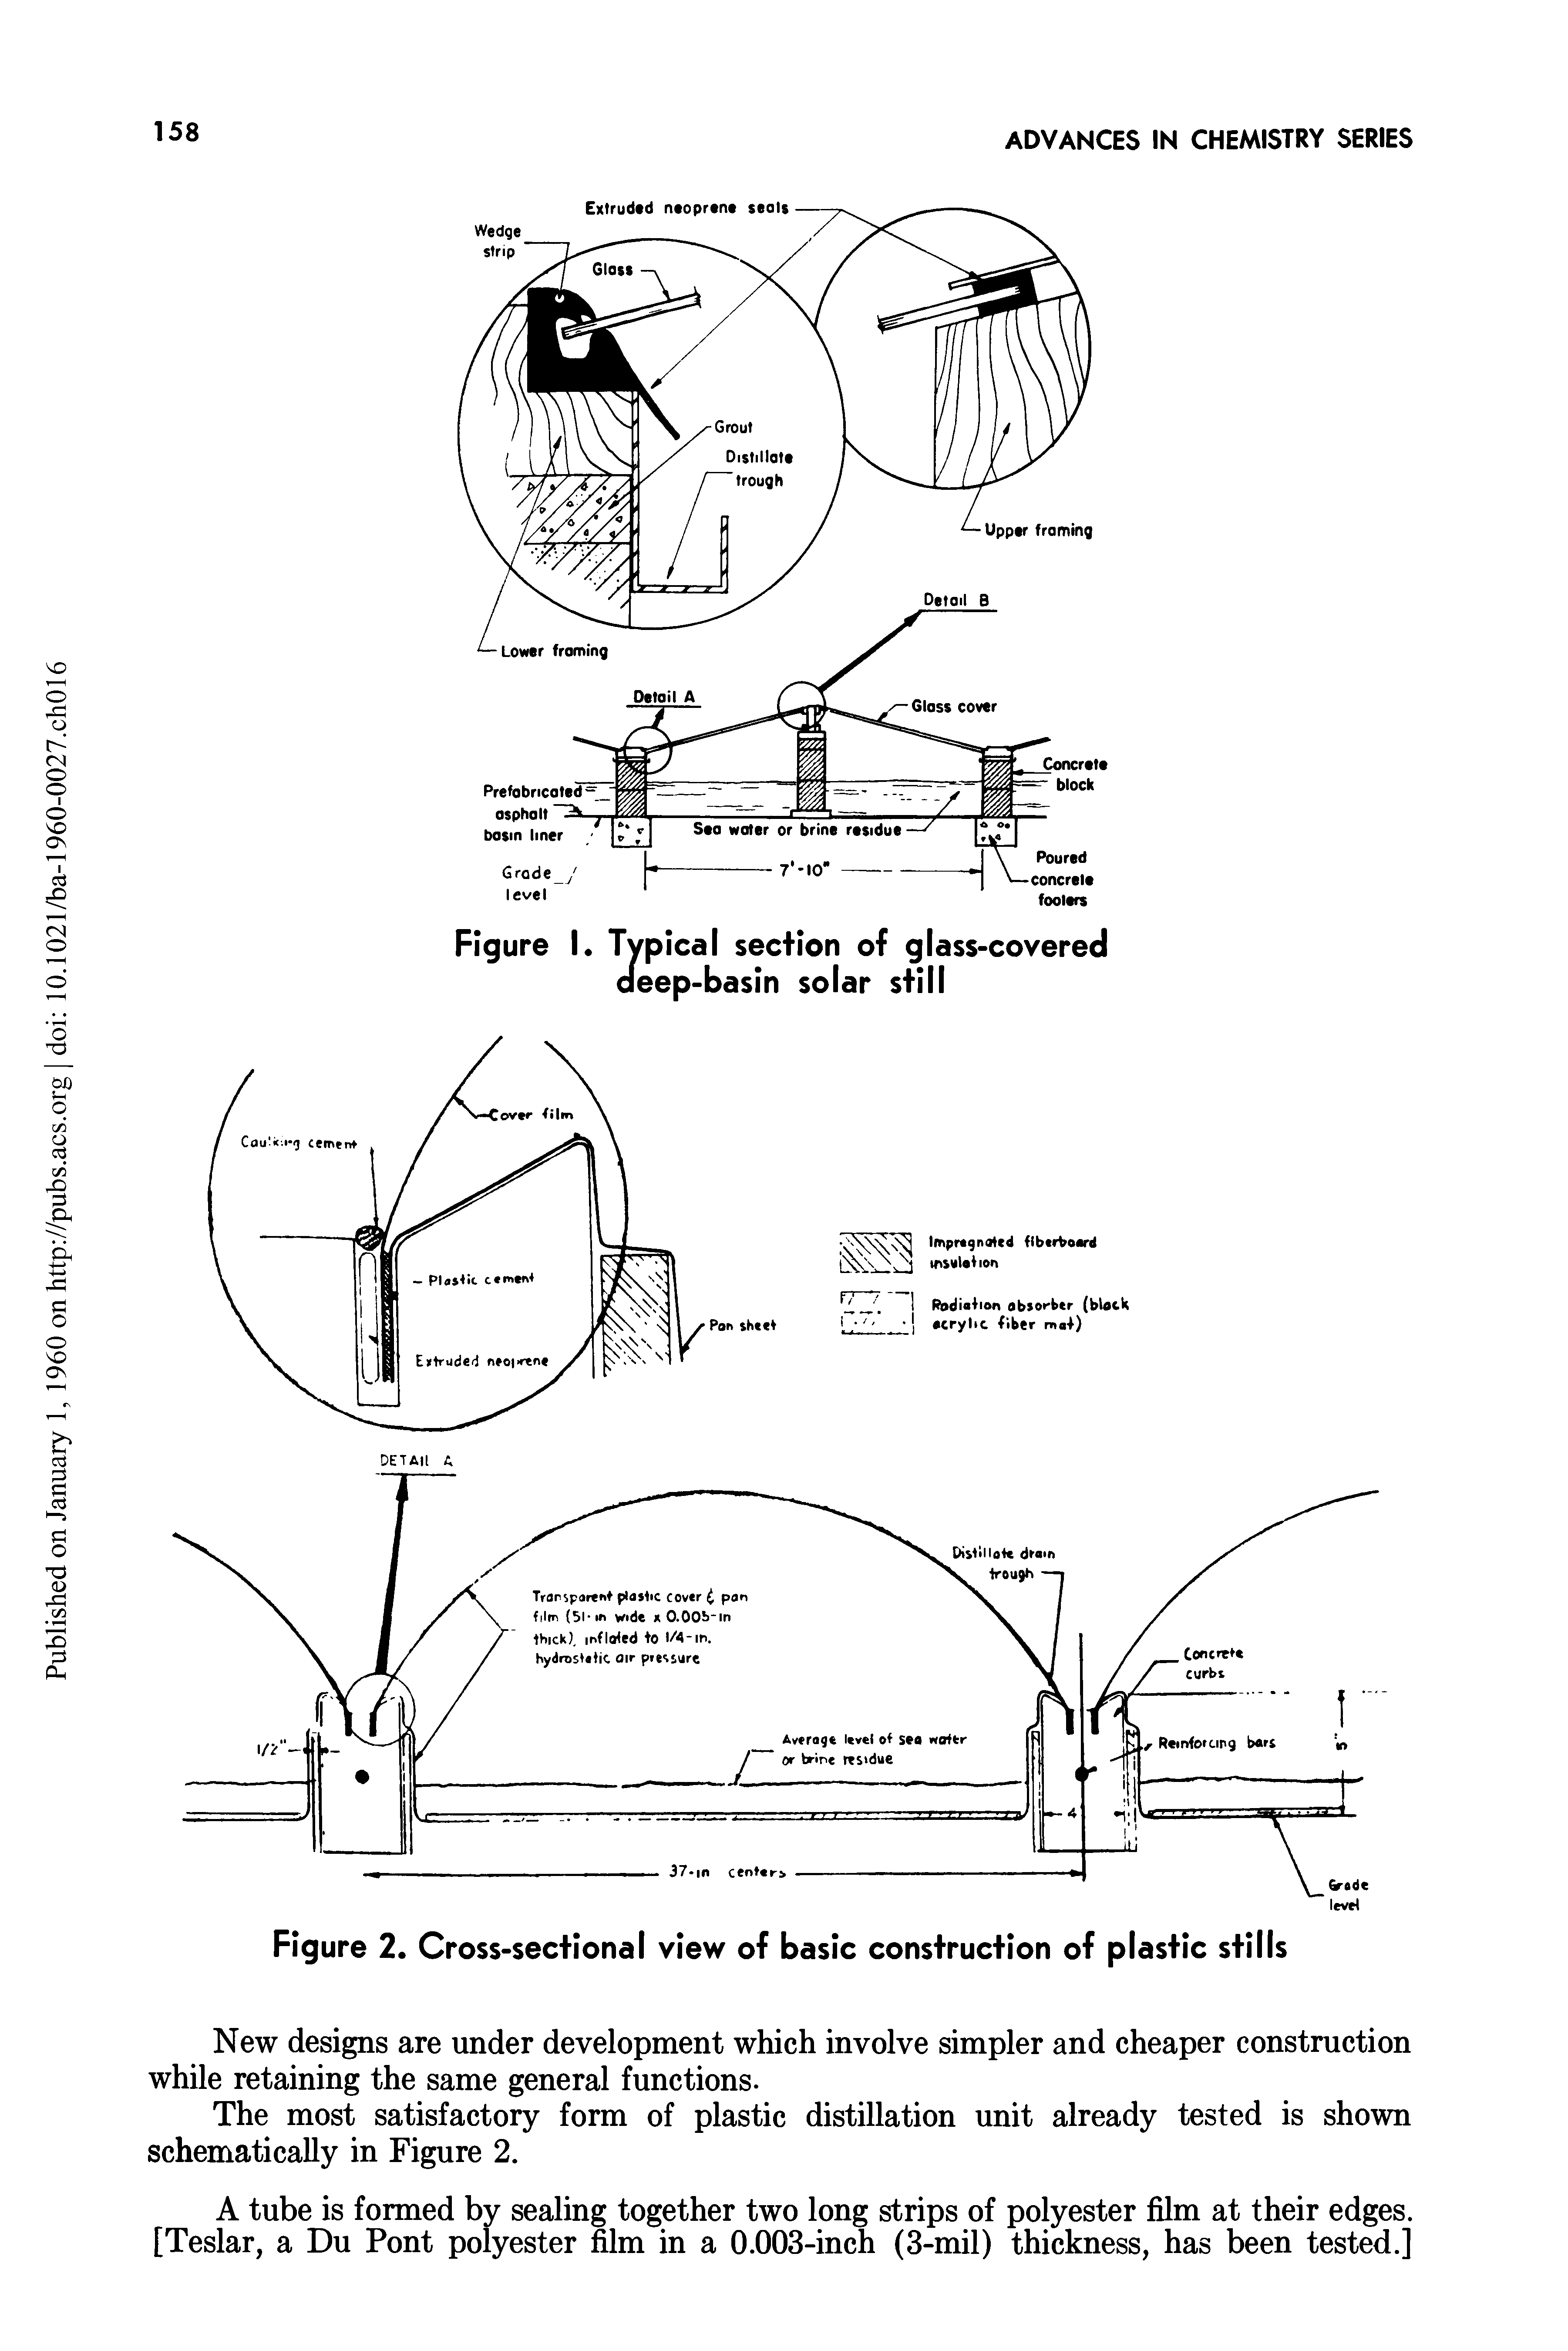 Figure 2. Cross-sectional view of basic construction of plastic stills...